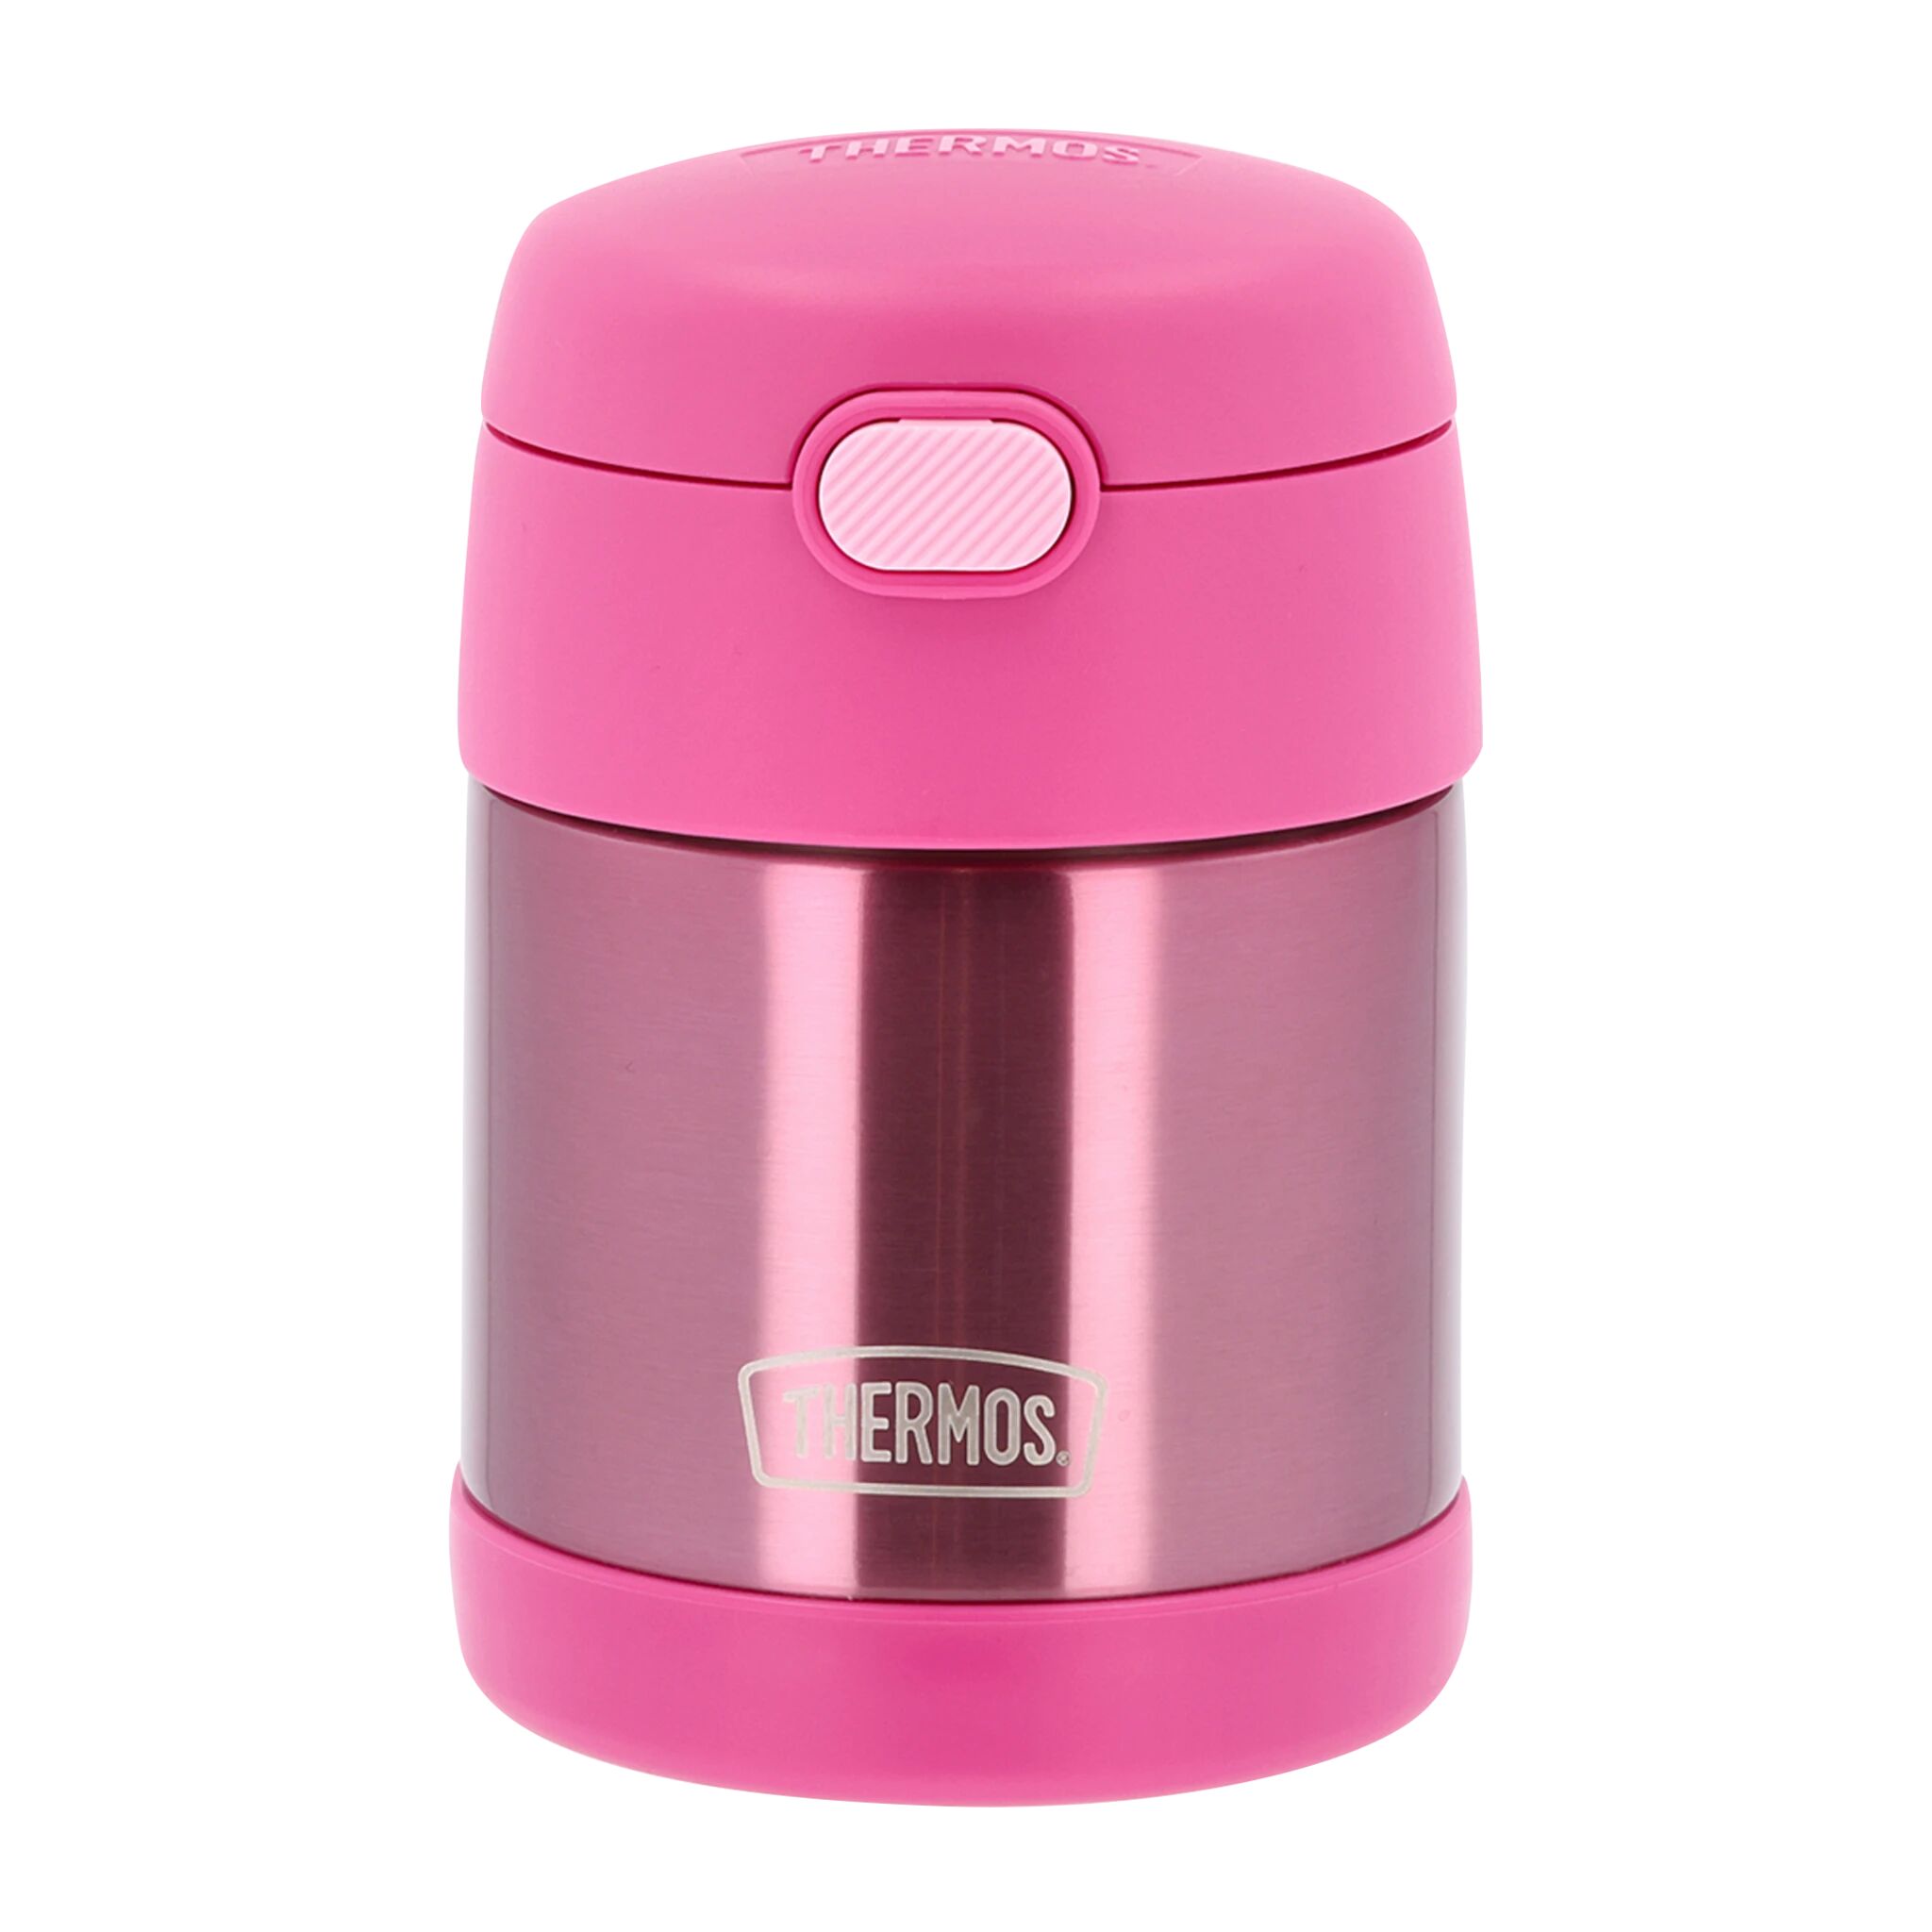 Thermos Funtainer Stainless Steel Food Jar With Folding Spoon, 290ml, mattermos 290 ml Pink